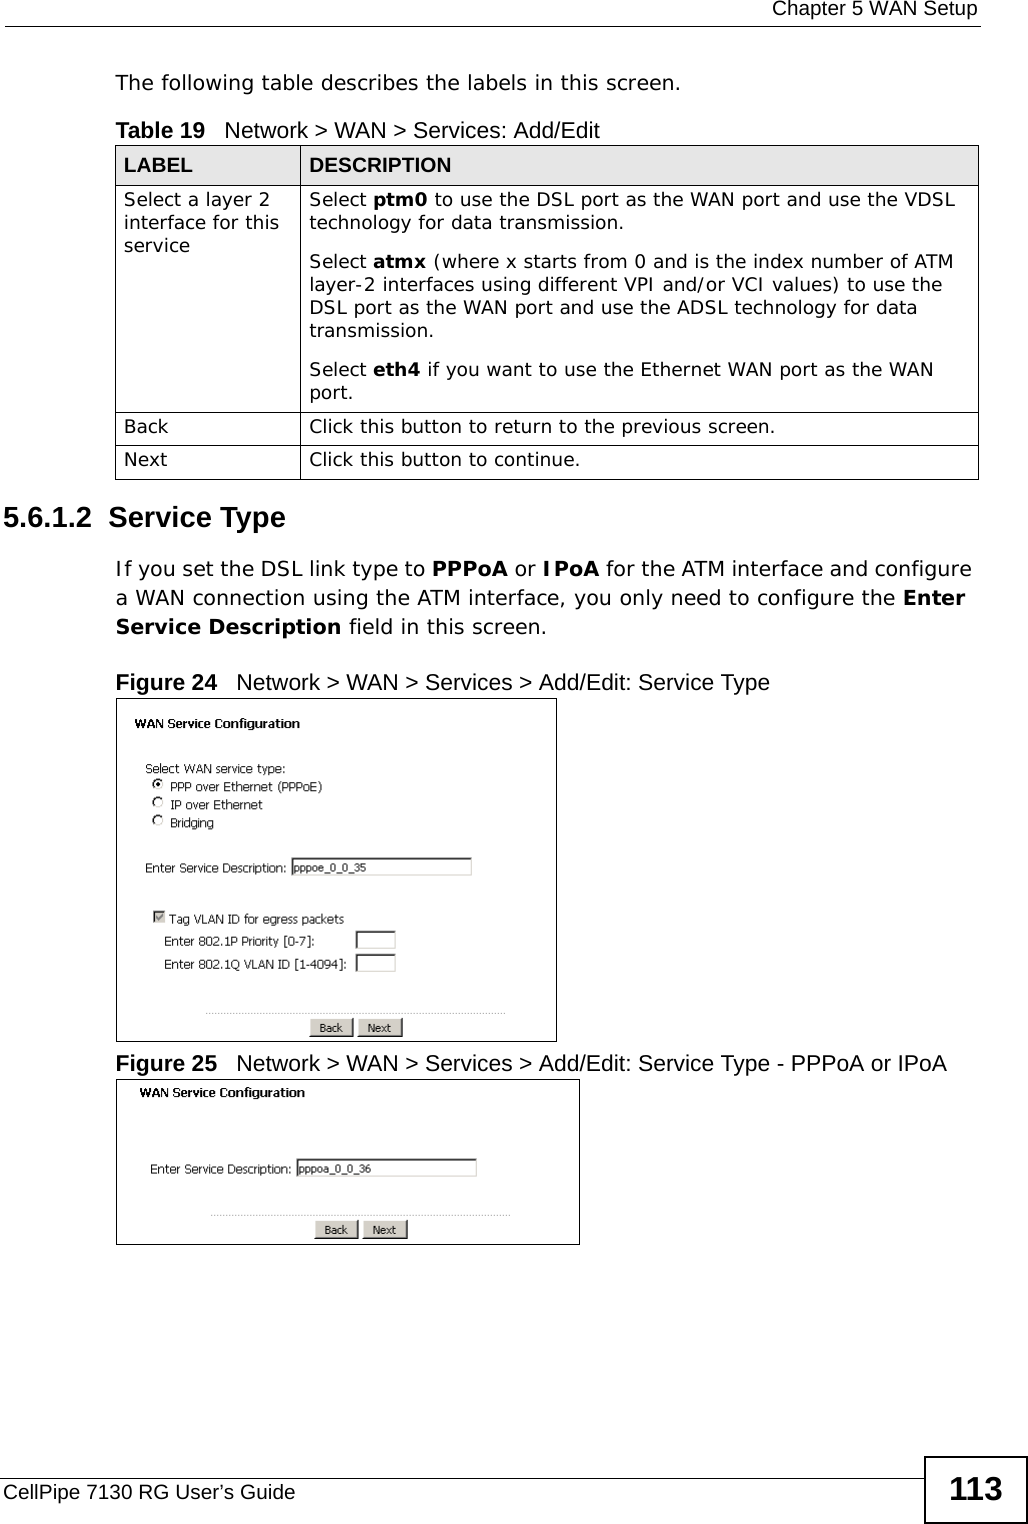  Chapter 5 WAN SetupCellPipe 7130 RG User’s Guide 113The following table describes the labels in this screen. 5.6.1.2  Service Type If you set the DSL link type to PPPoA or IPoA for the ATM interface and configure a WAN connection using the ATM interface, you only need to configure the Enter Service Description field in this screen.Figure 24   Network &gt; WAN &gt; Services &gt; Add/Edit: Service TypeFigure 25   Network &gt; WAN &gt; Services &gt; Add/Edit: Service Type - PPPoA or IPoA Table 19   Network &gt; WAN &gt; Services: Add/EditLABEL DESCRIPTIONSelect a layer 2 interface for this serviceSelect ptm0 to use the DSL port as the WAN port and use the VDSL technology for data transmission.Select atmx (where x starts from 0 and is the index number of ATM layer-2 interfaces using different VPI and/or VCI values) to use the DSL port as the WAN port and use the ADSL technology for data transmission.Select eth4 if you want to use the Ethernet WAN port as the WAN port.Back Click this button to return to the previous screen.Next Click this button to continue.